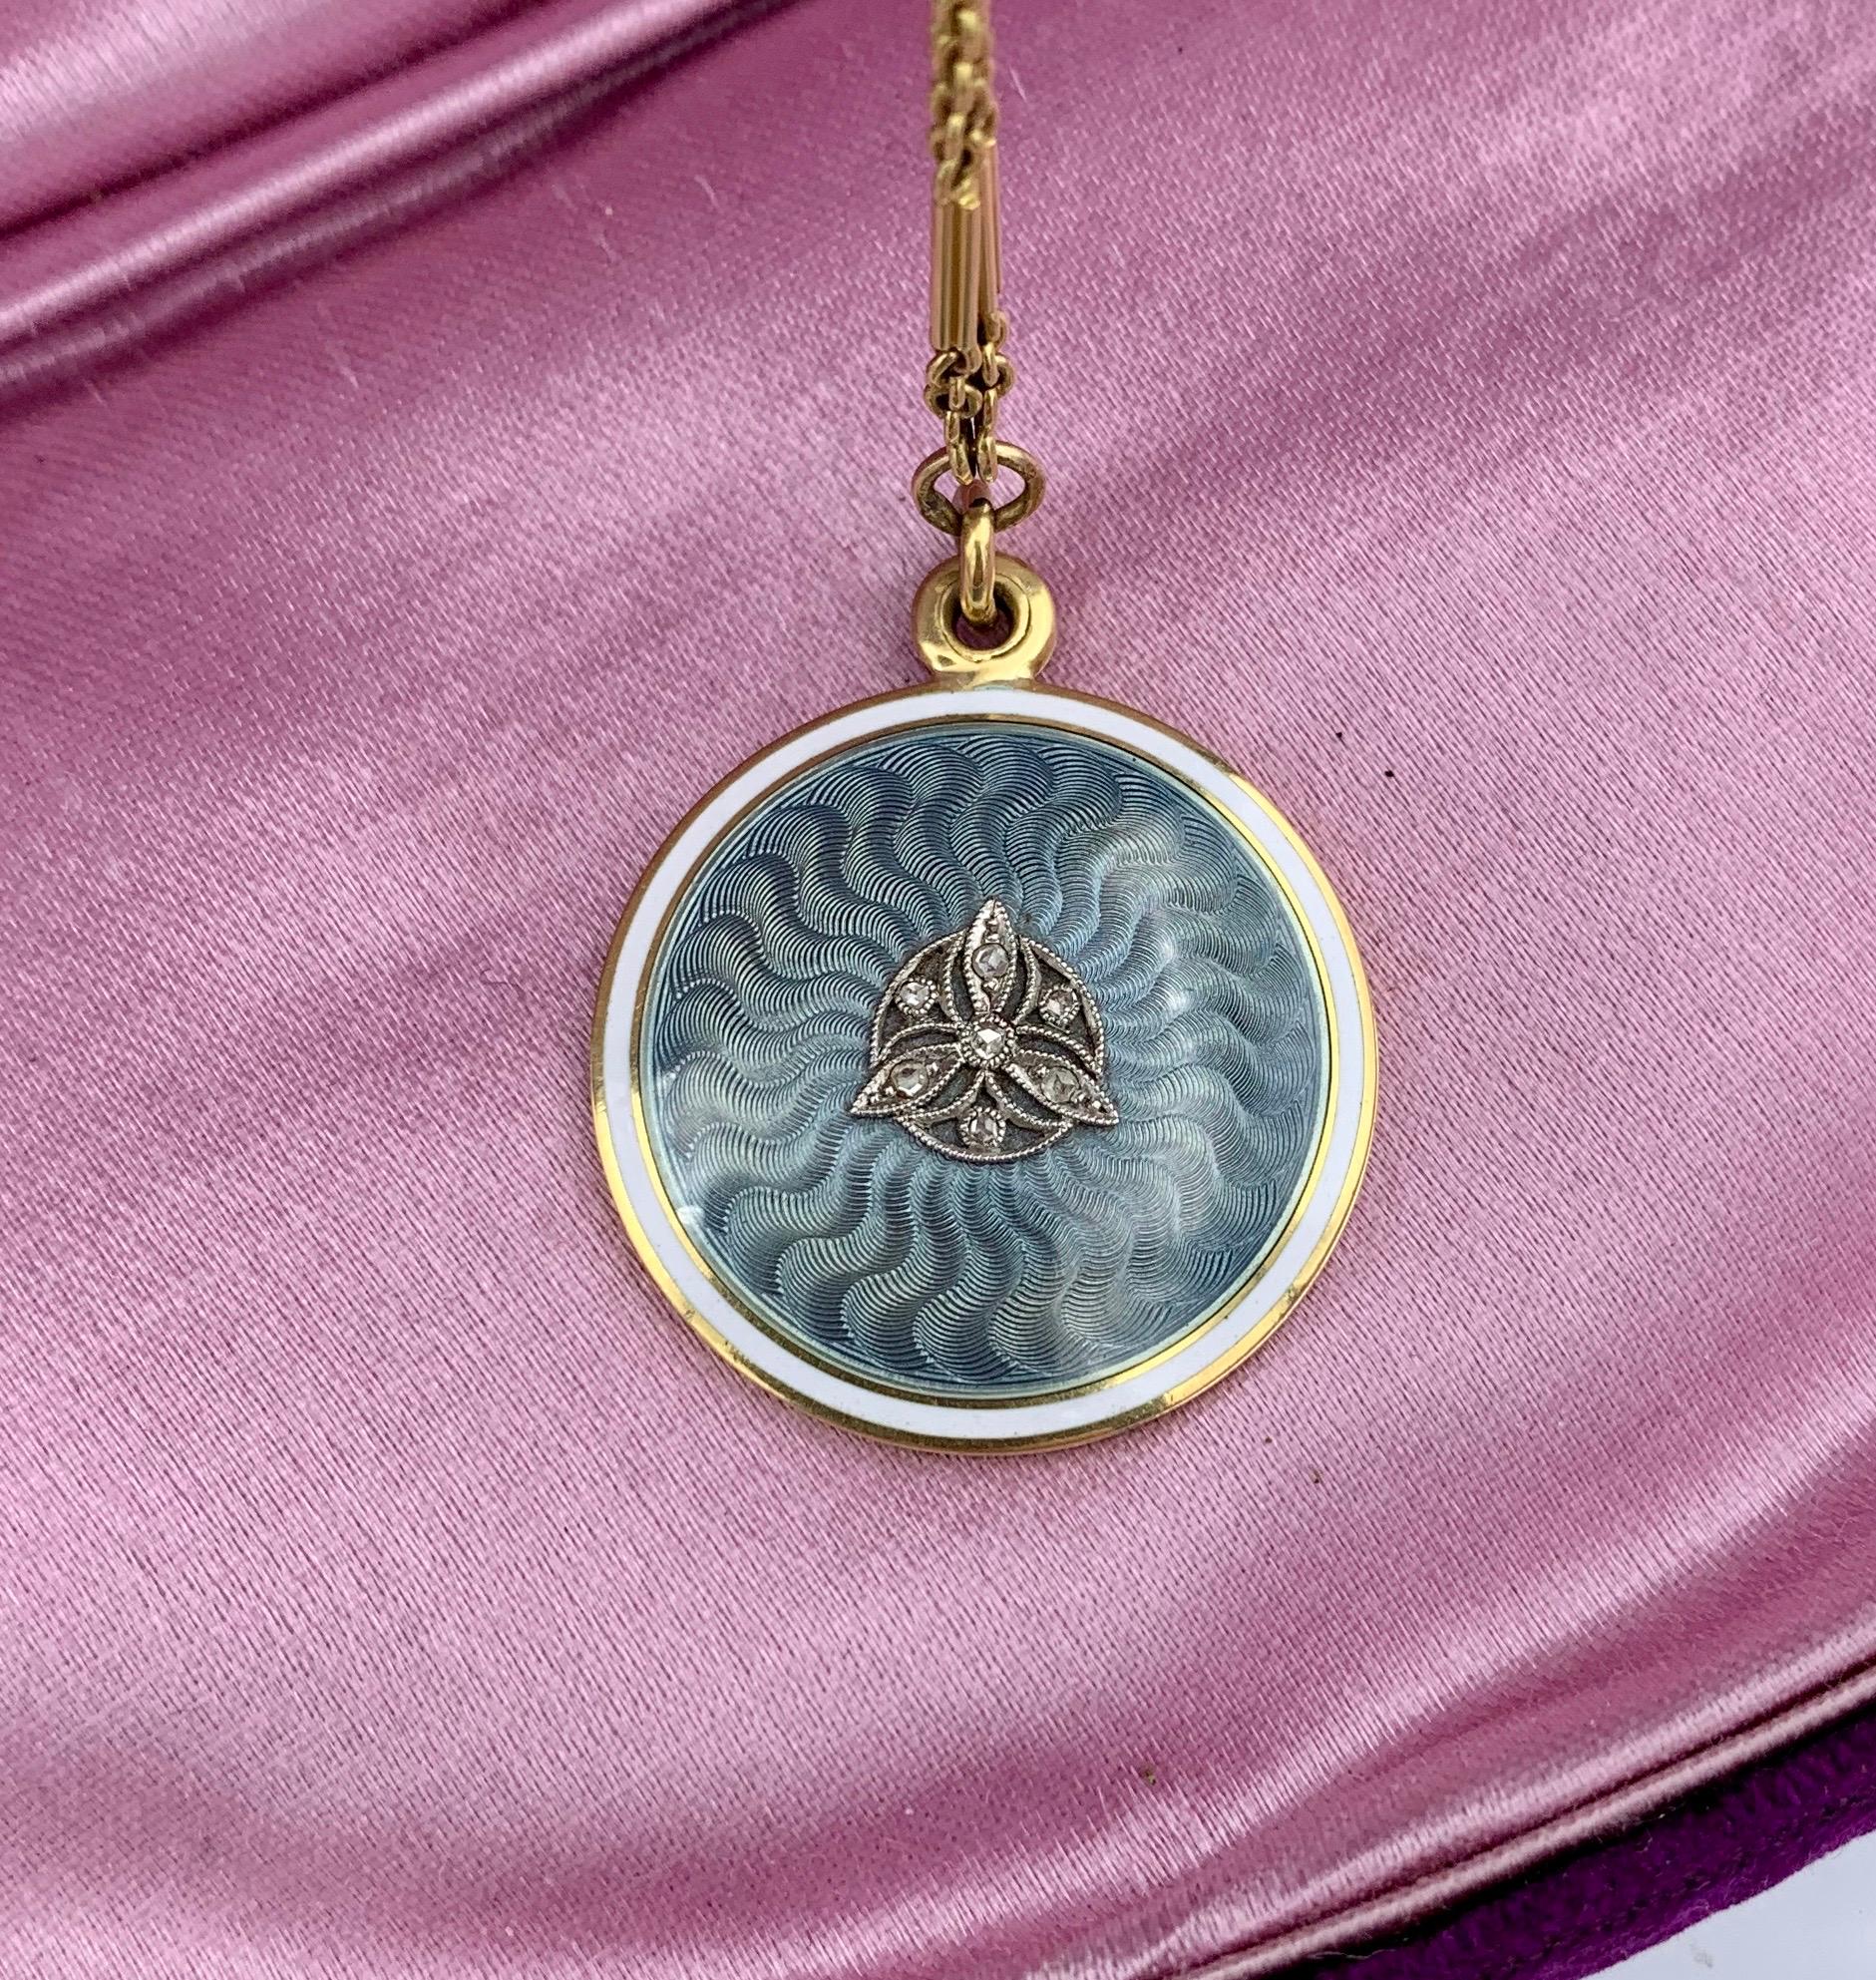 This is a Museum Quality Antique Edwardian Locket Necklace from the estate of Ambassador Evan Galbraith.  The magnificent locket (one of two matching lockets from the estate) has exquisite robin's egg blue guilloche enamel with a white enamel target